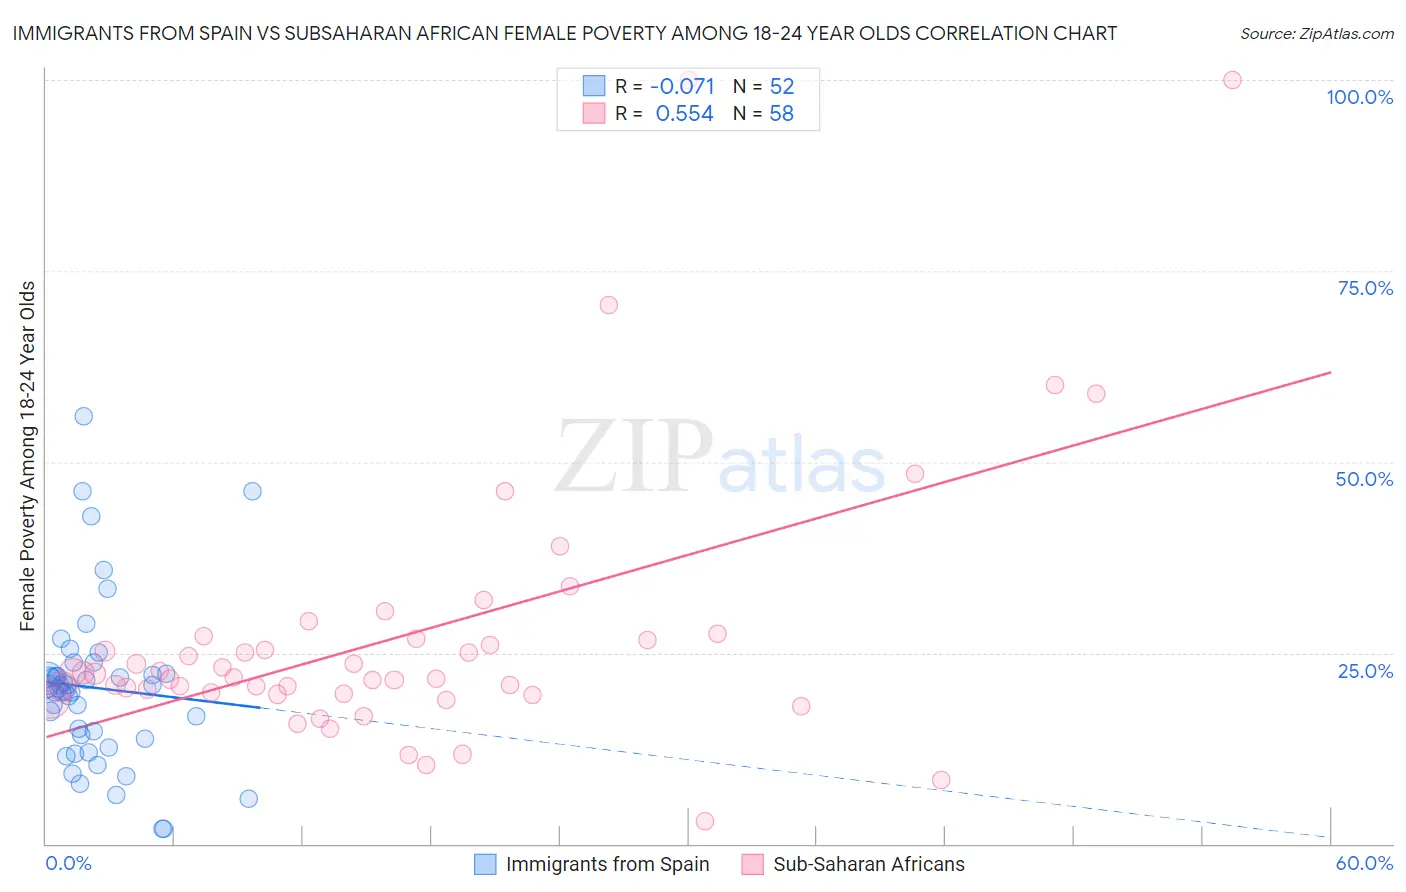 Immigrants from Spain vs Subsaharan African Female Poverty Among 18-24 Year Olds